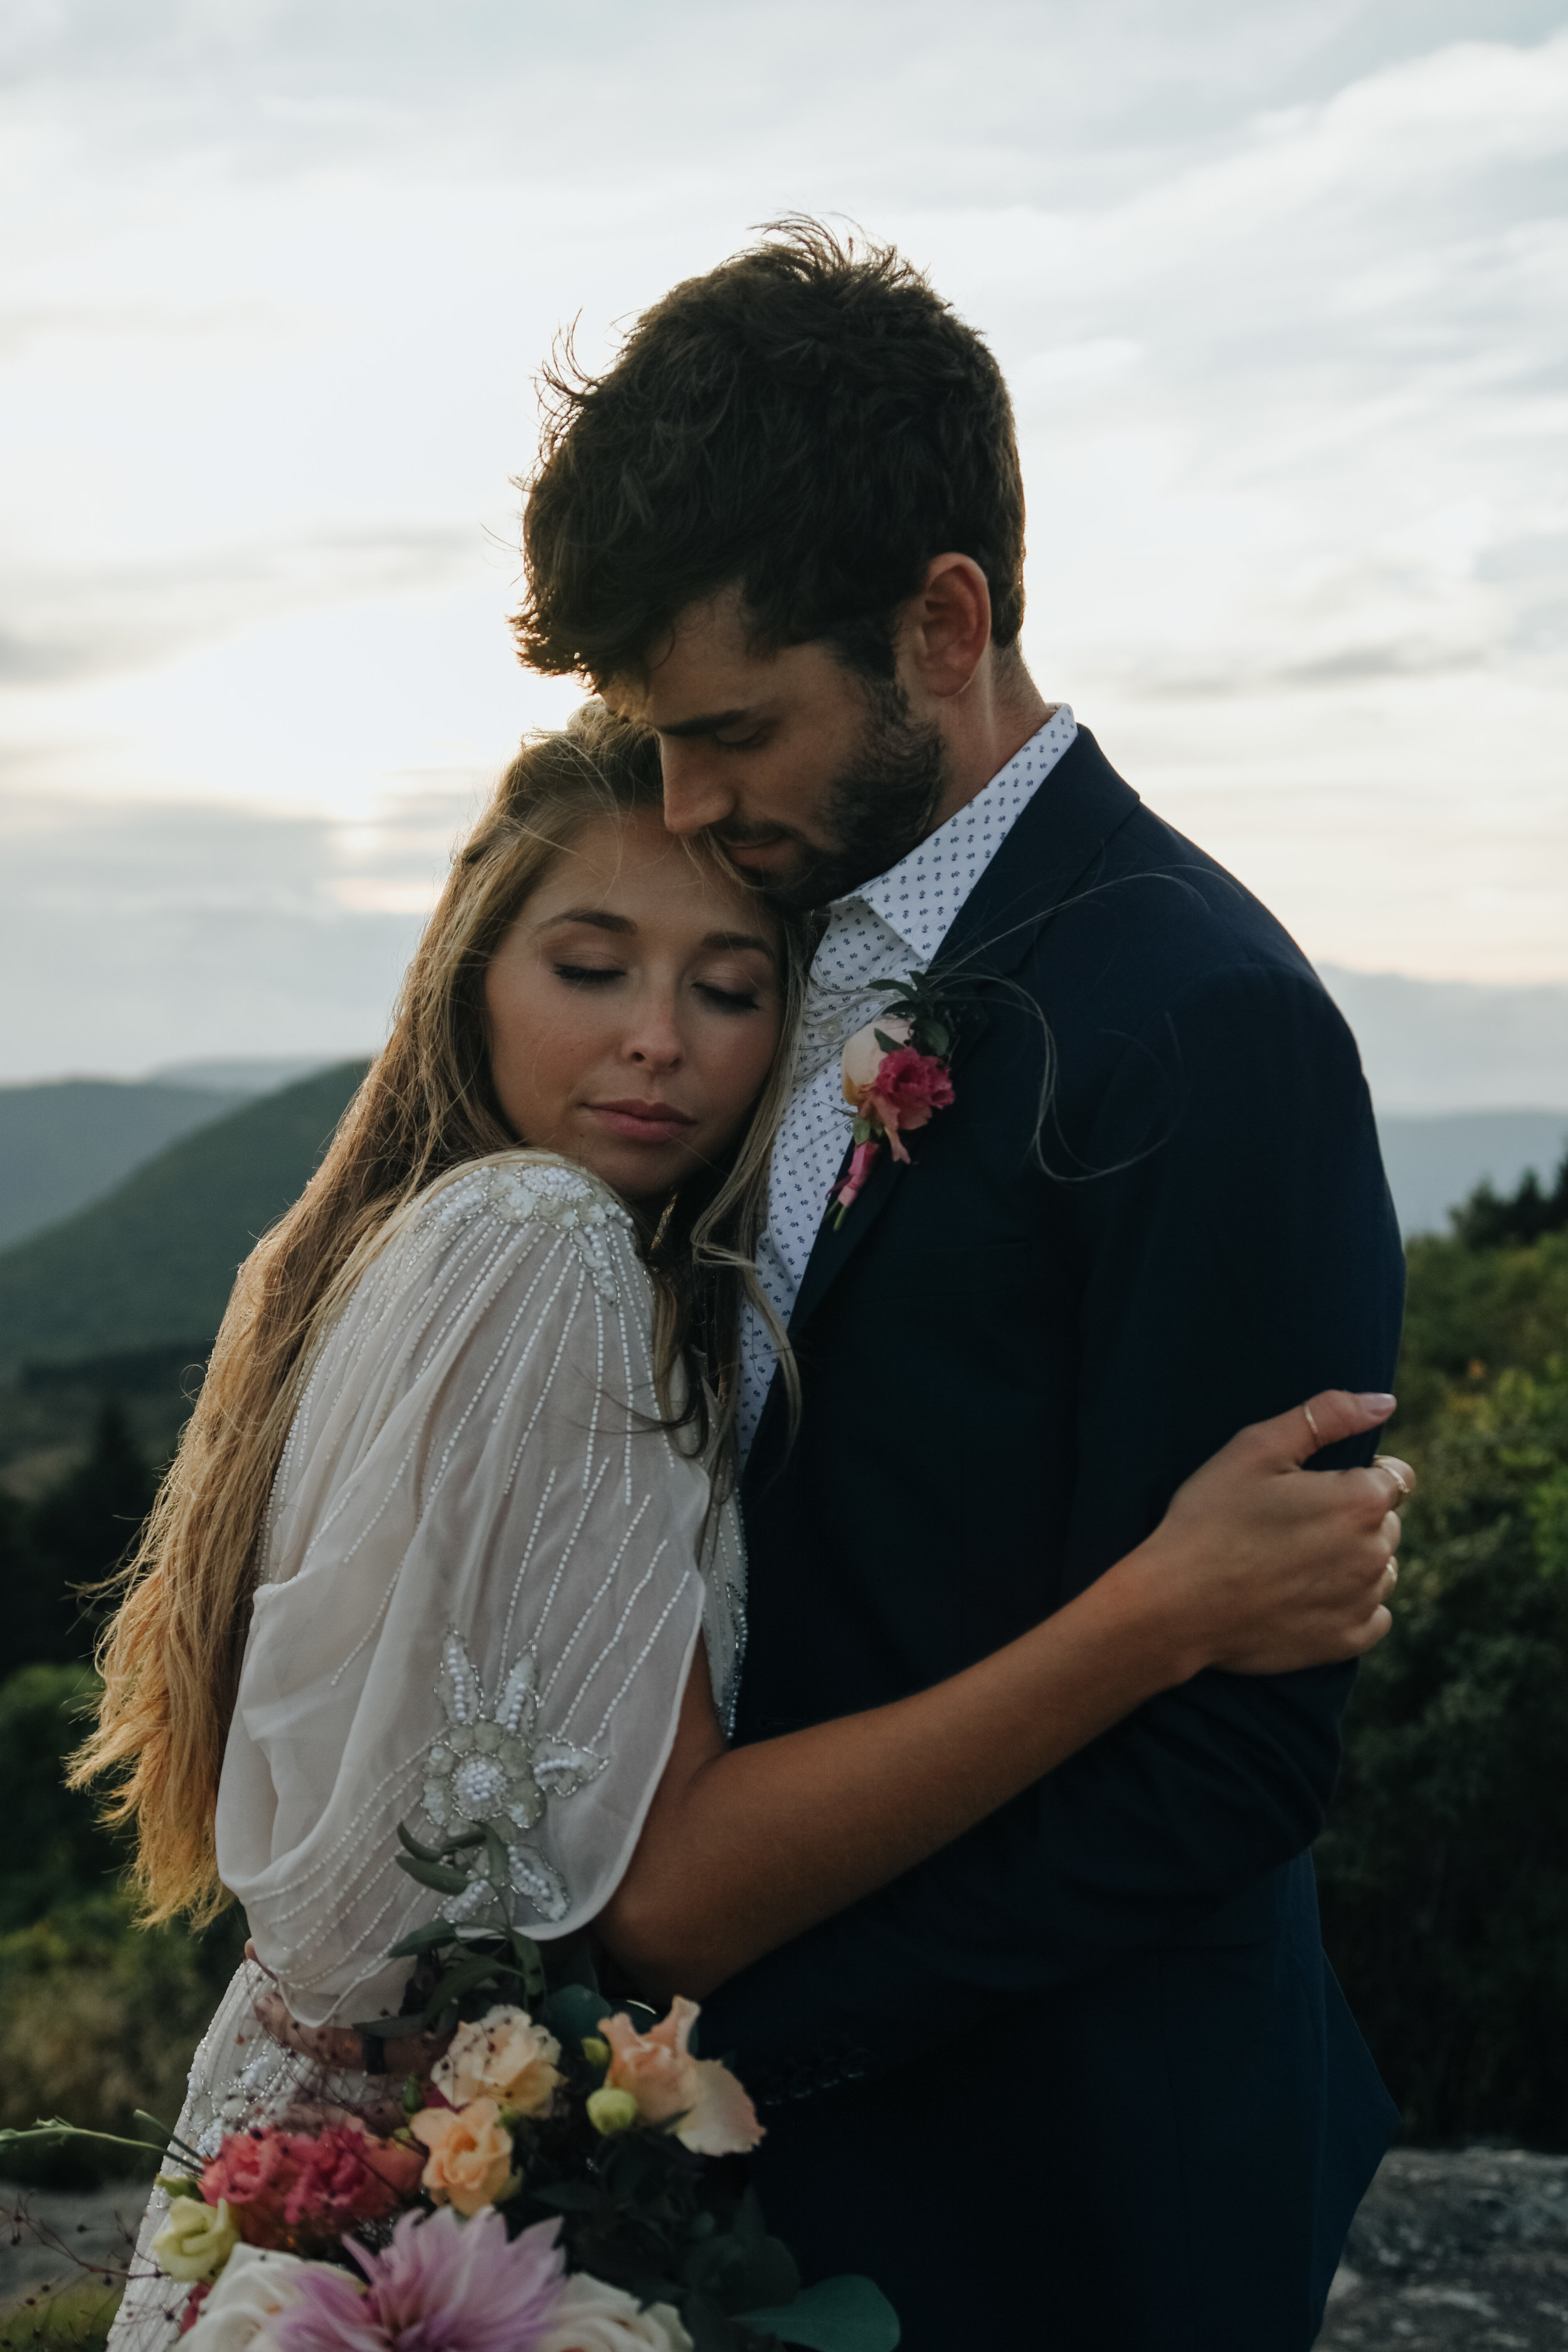  A picture of a couple after their elopement, romantically embracing each other closely as the bride rests her face against her partner’s chest while he tenderly leans his face down toward her at Black Balsam Knob, southwest of Asheville, North Carol